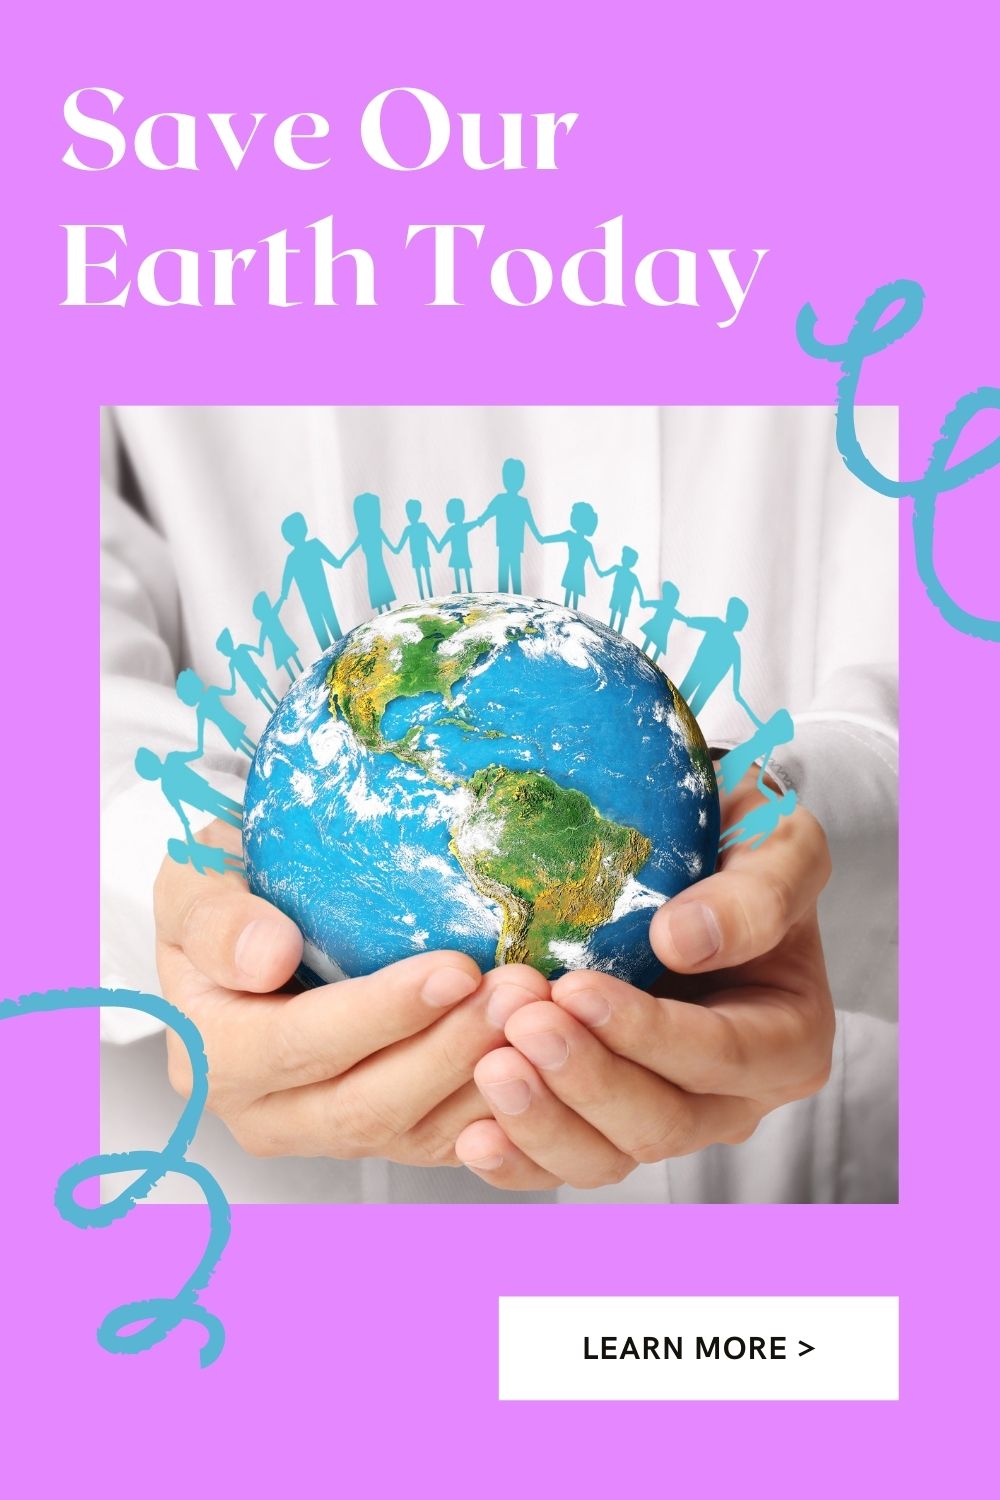 <img src="save.jpg" alt="save our earth help a small business be eco-friendly"/> 